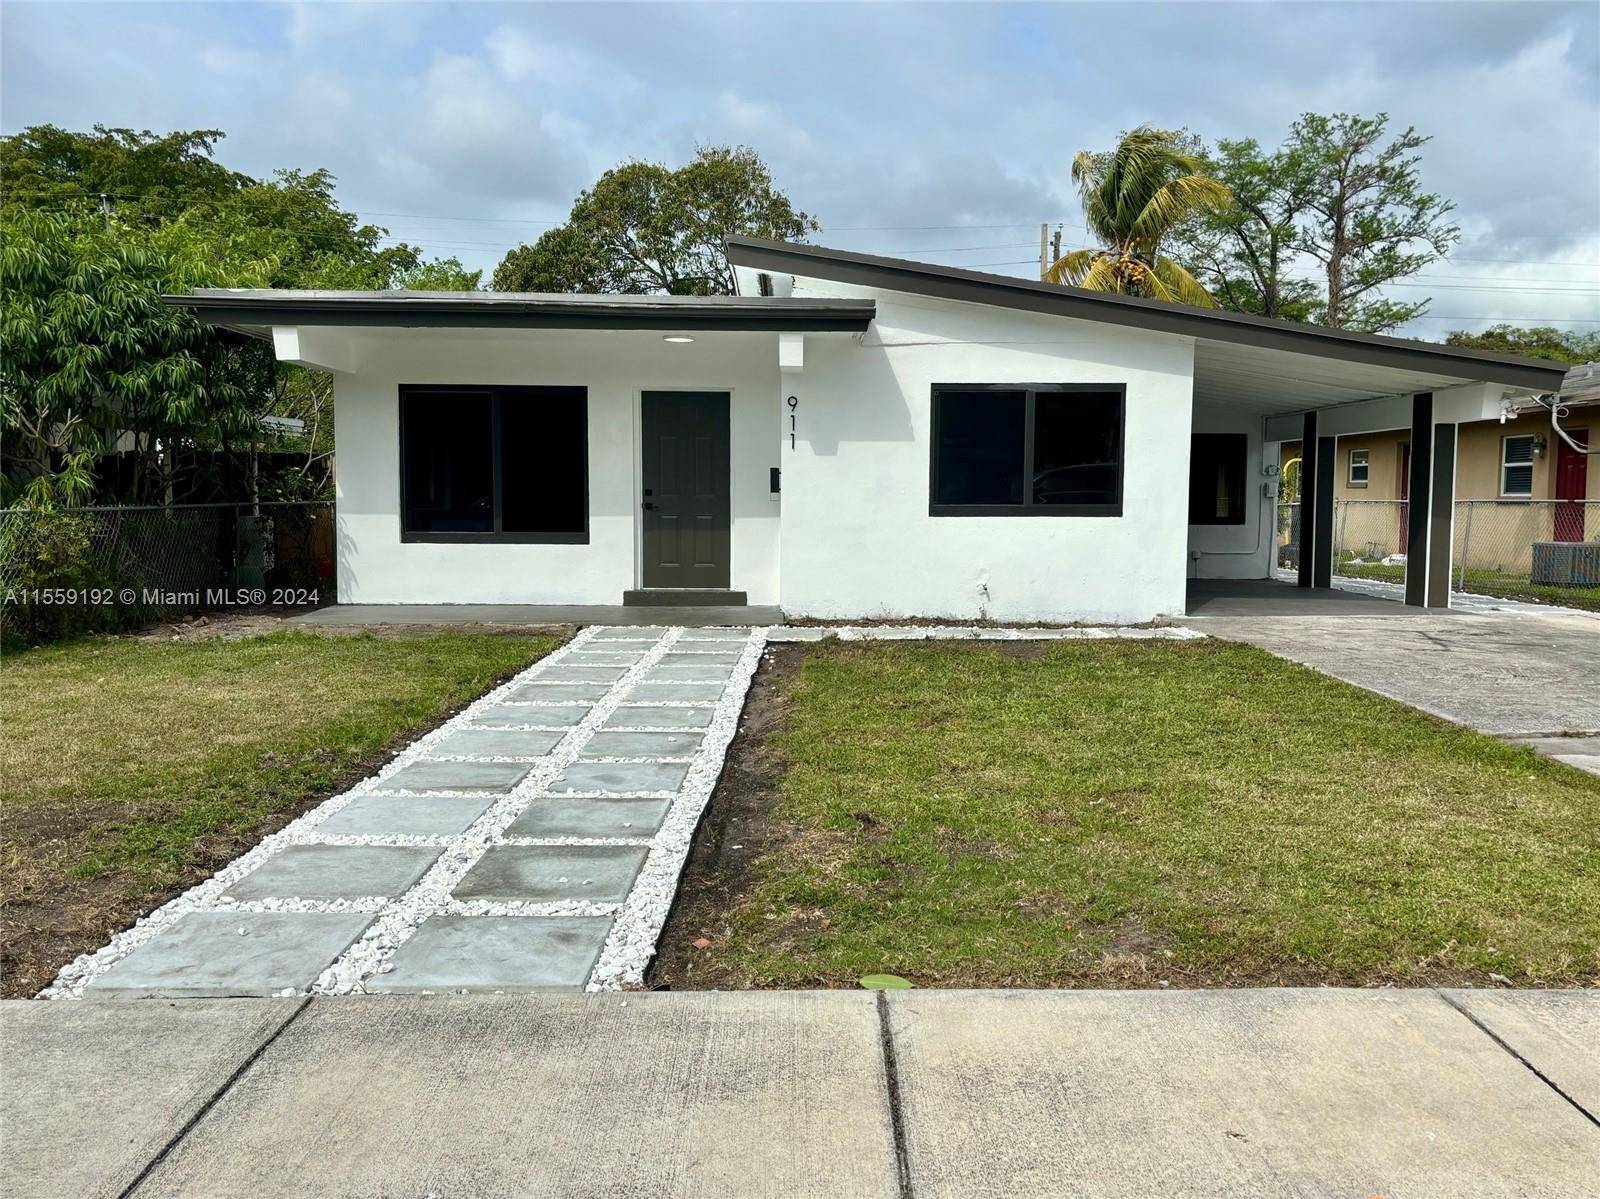 BEAUTIFULLY REMODELED 4 2 IN THE HEART OF FORT LAUDERDALE.